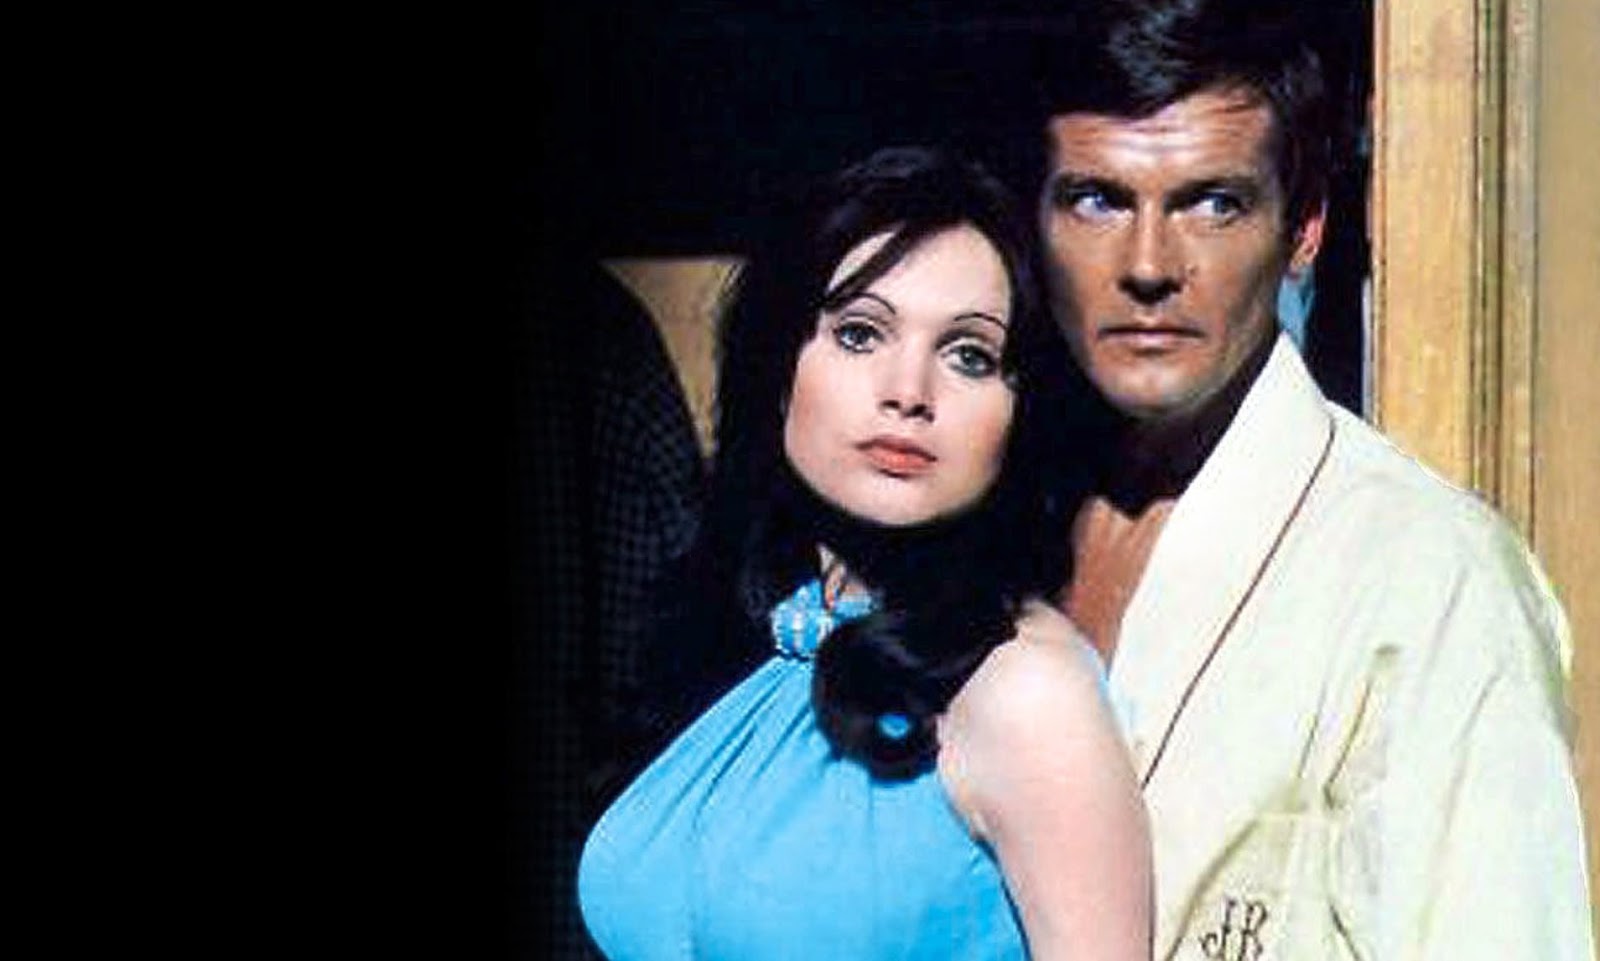 Actress Madeline Smith and Roger Moore as James Bond